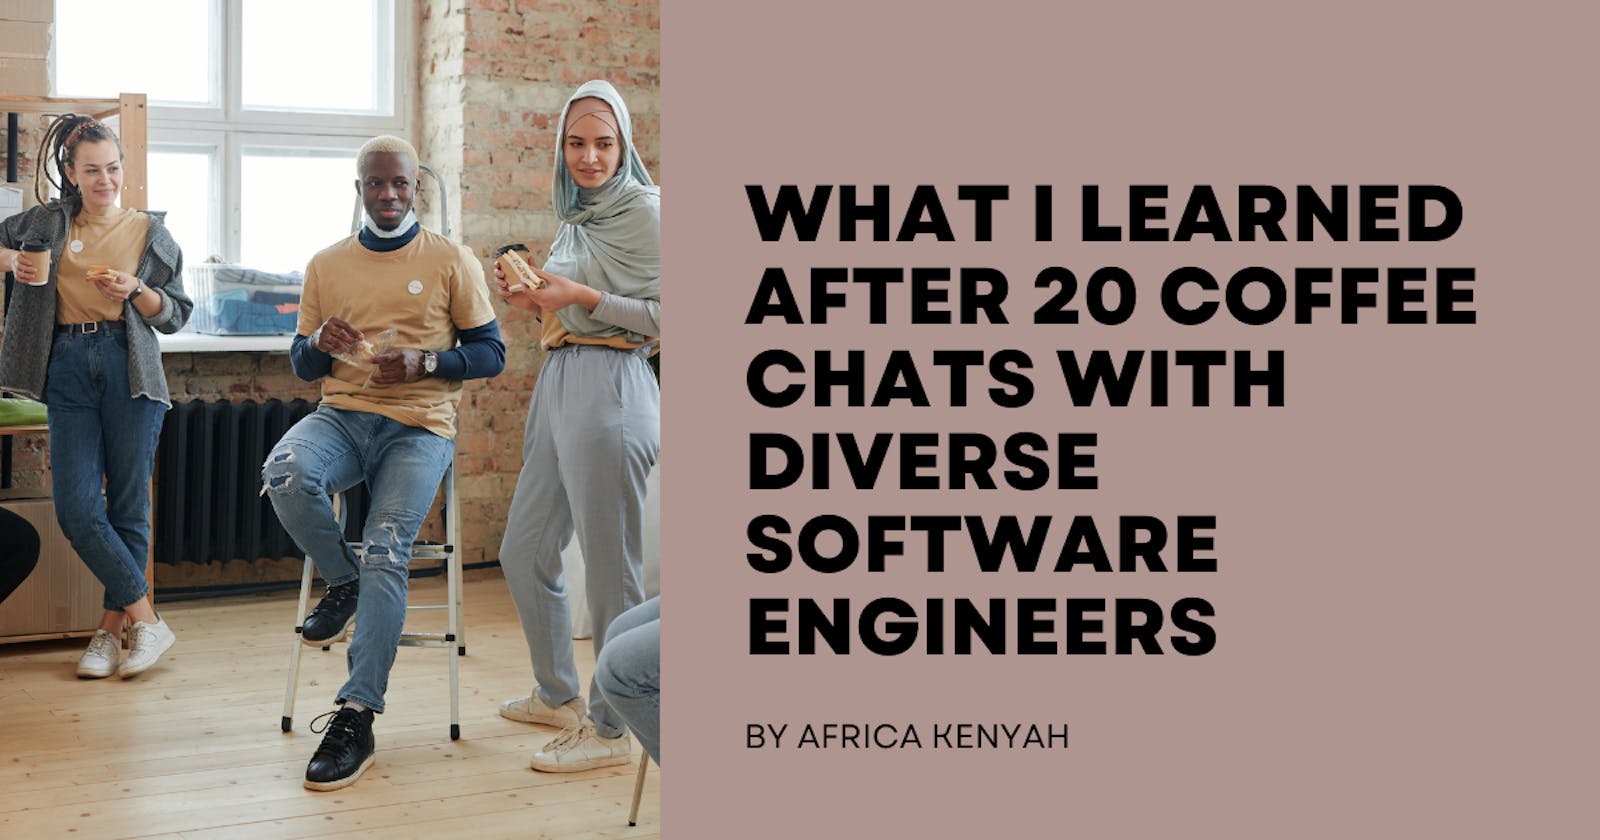 What I Learned After 20 Coffee Chats with Diverse Software Engineers